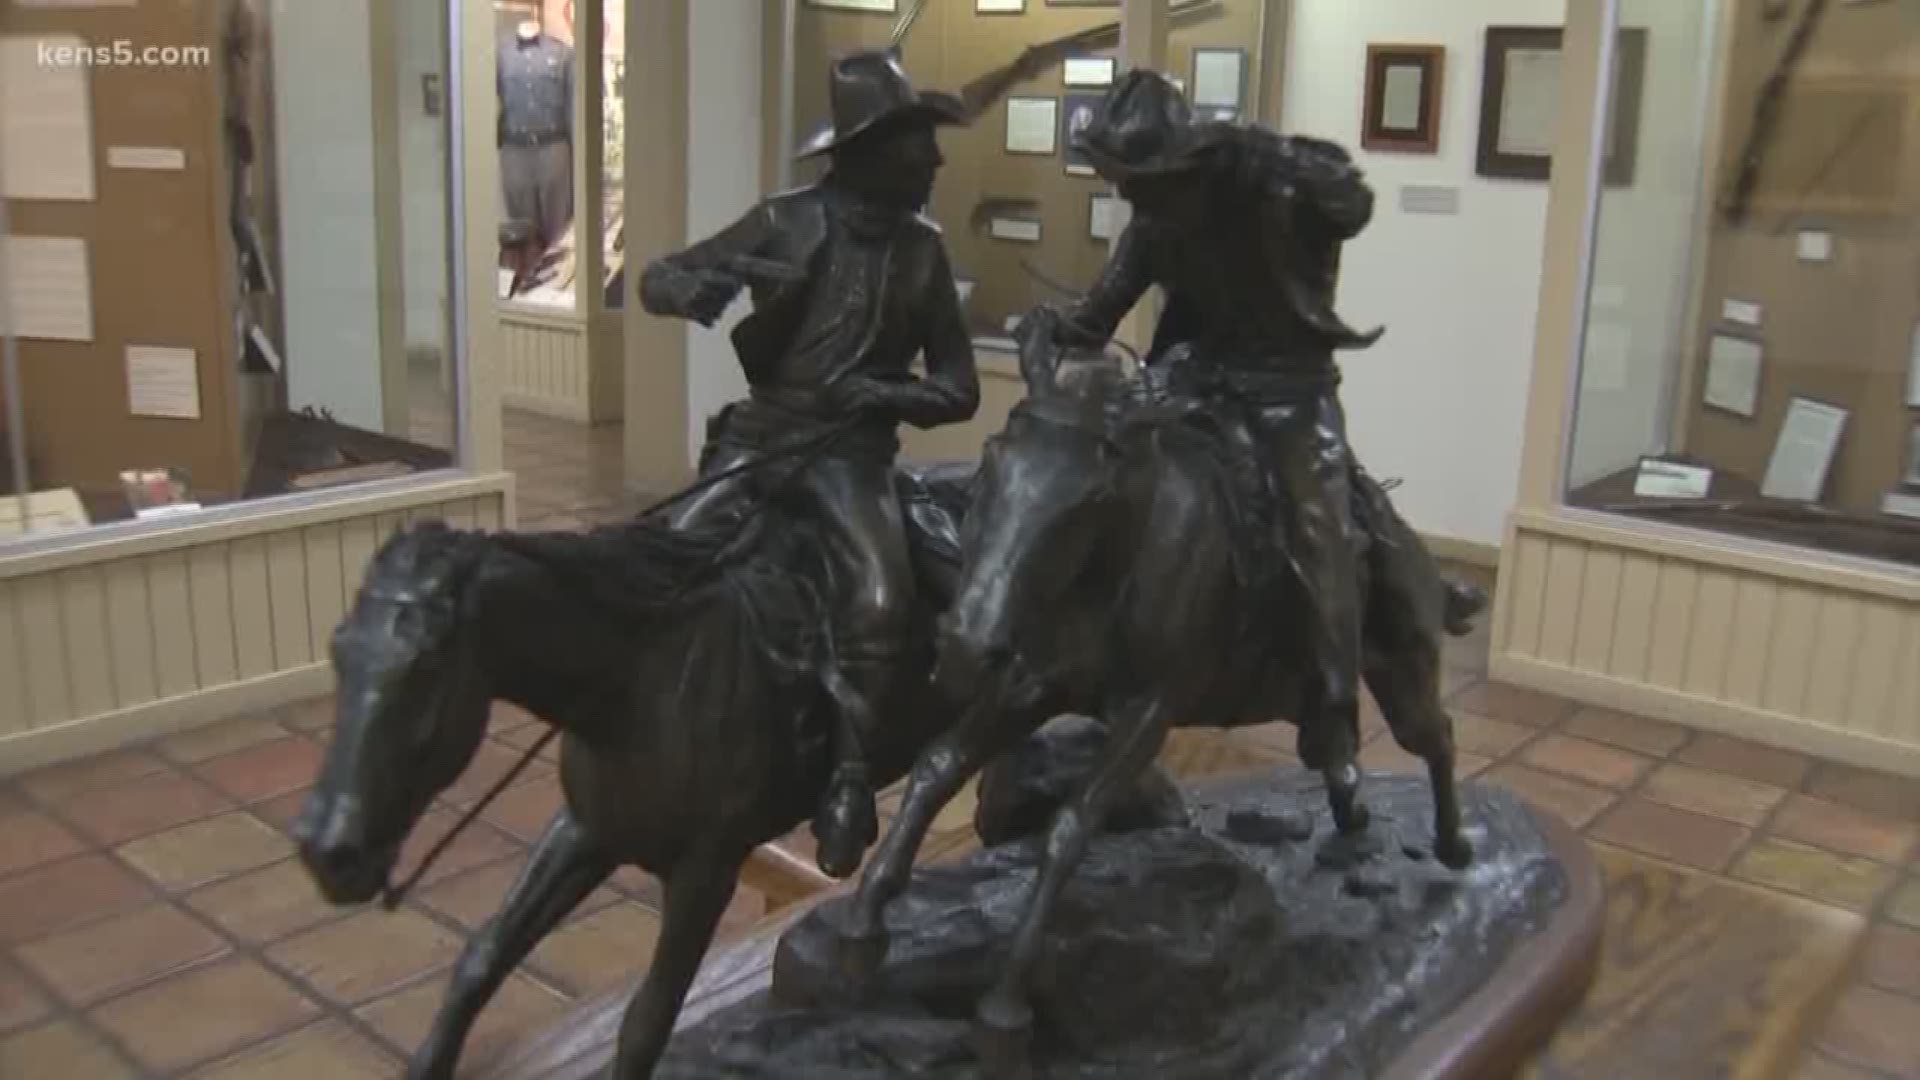 There's a museum in Waco that has everything, dating back to the creation of the Texas Rangers and that's where we're going in this week's Texas Outdoors.